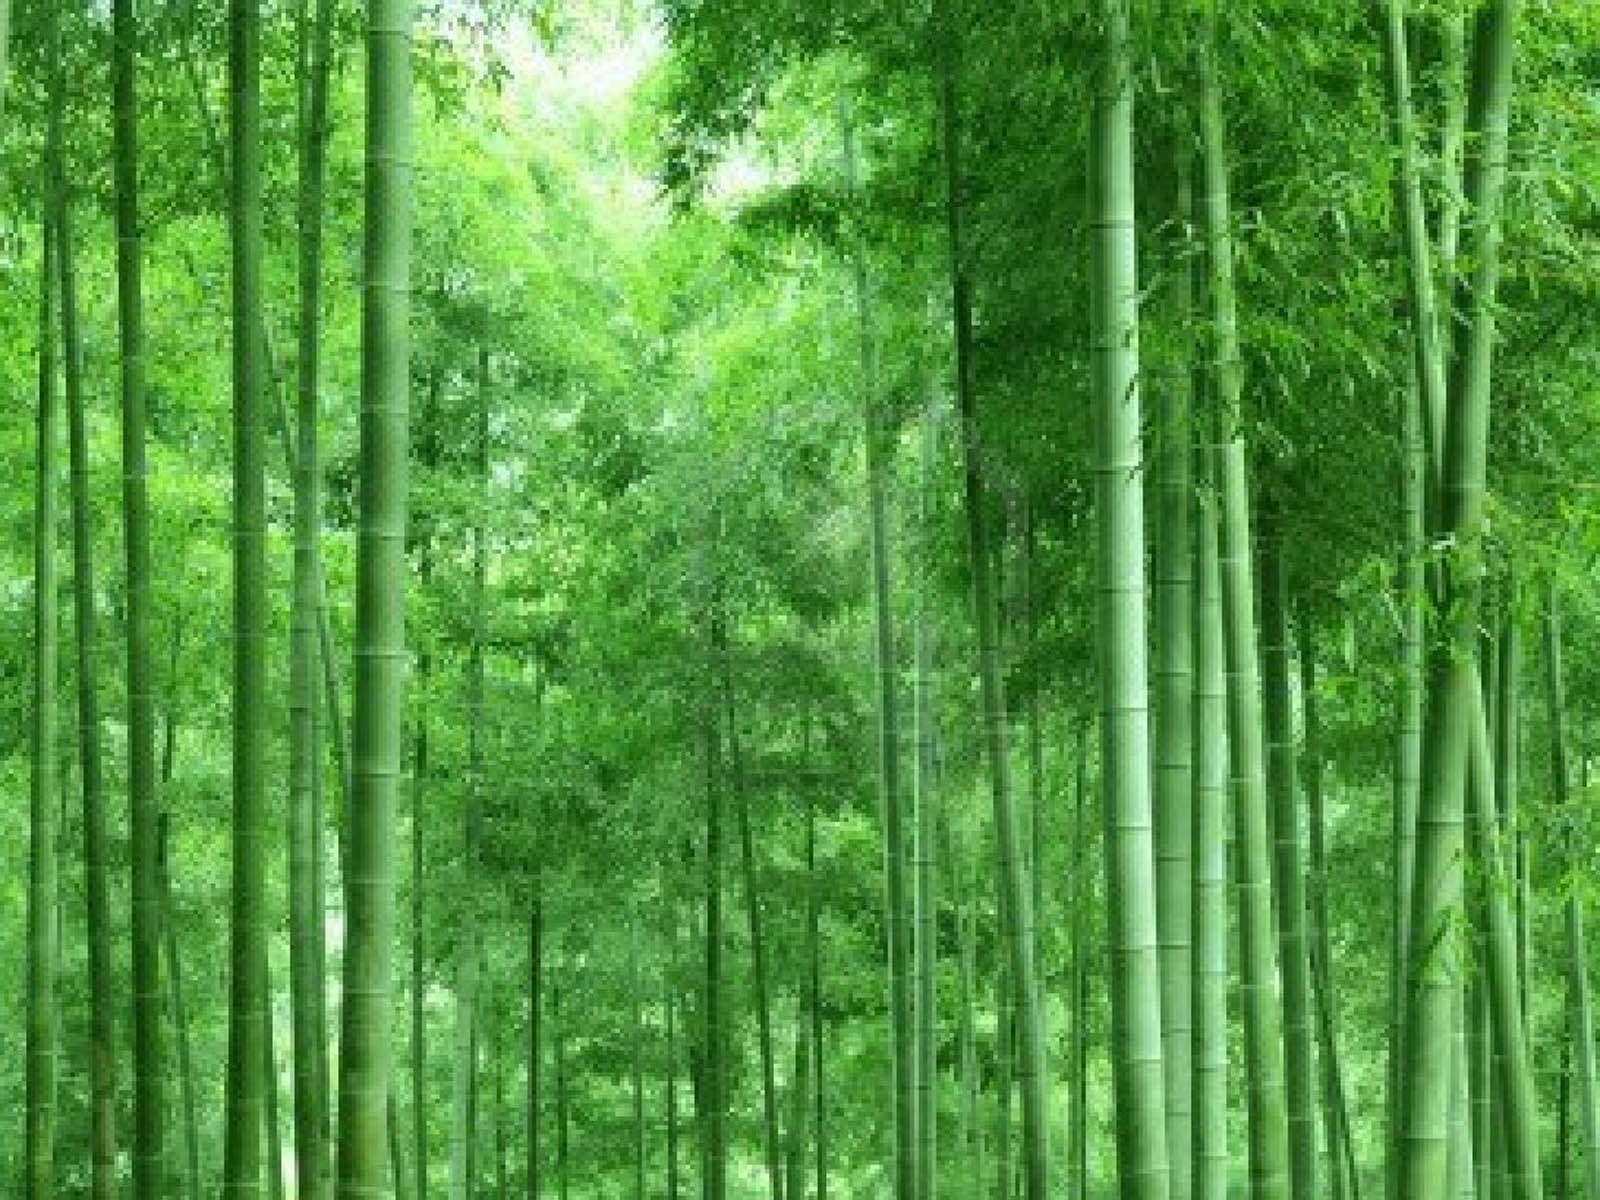 Bamboo Forest Wallpaper Image Photos Pictures And Background